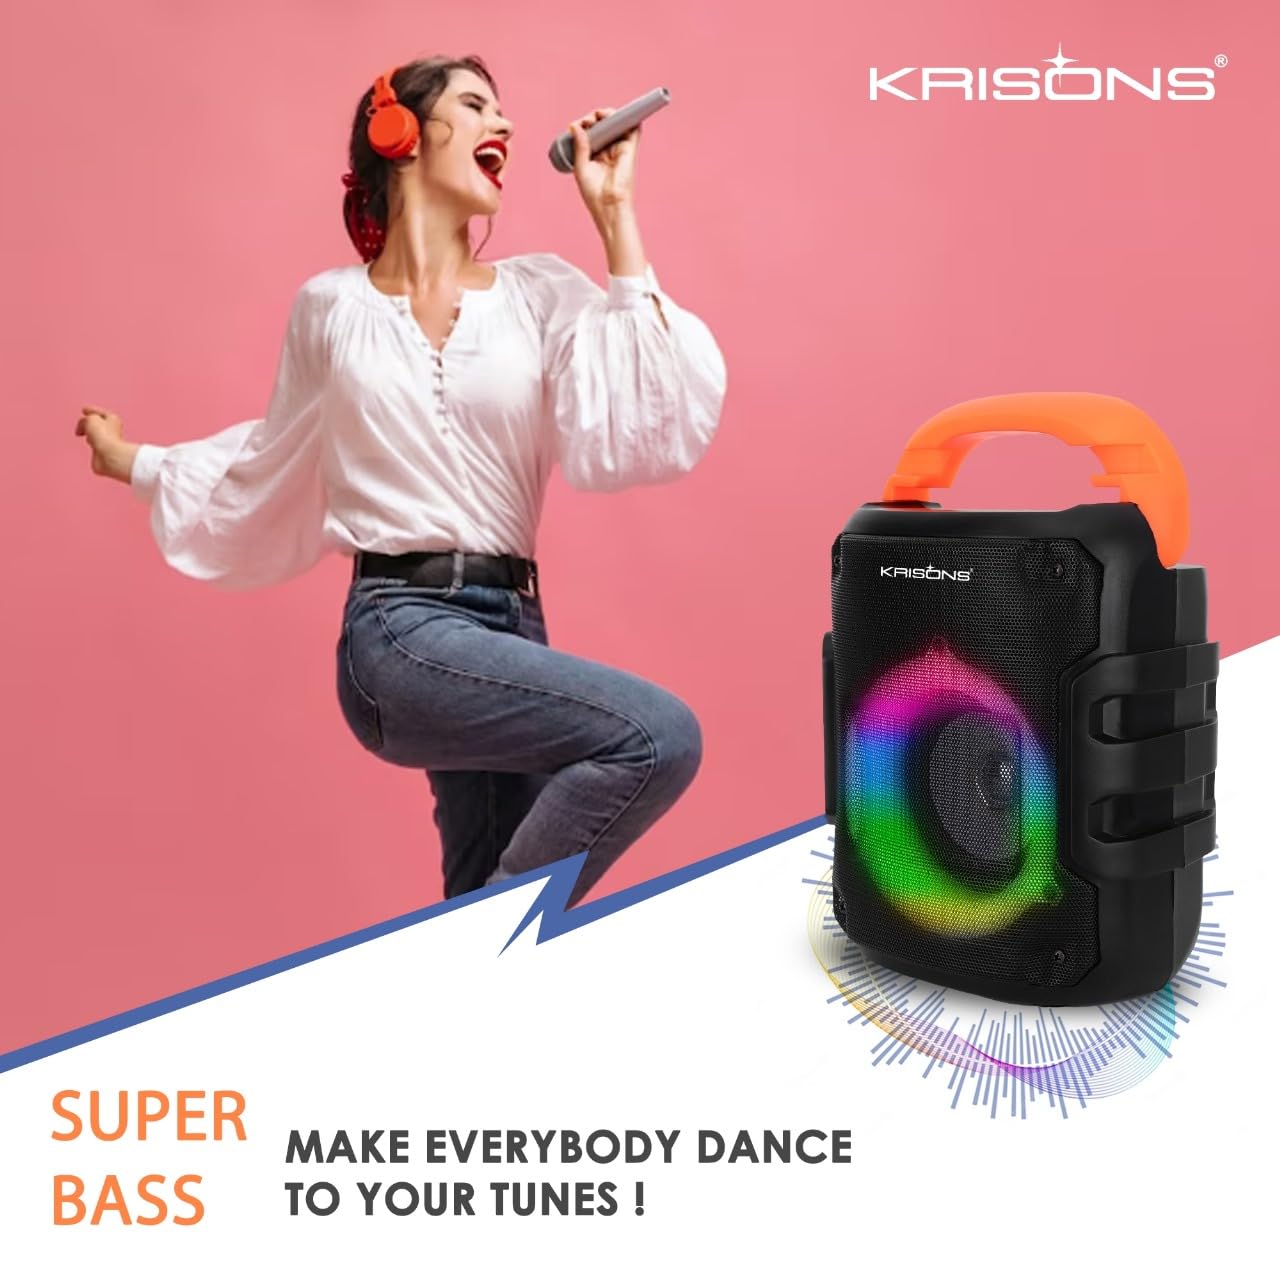 Krisons Sunshine 4" Woofer 35 W Multi-Media Bluetooth Party Speaker with Wired Mic for Karaoke, Digital Display,RGB Lights, USB, SD Card and FM Radio